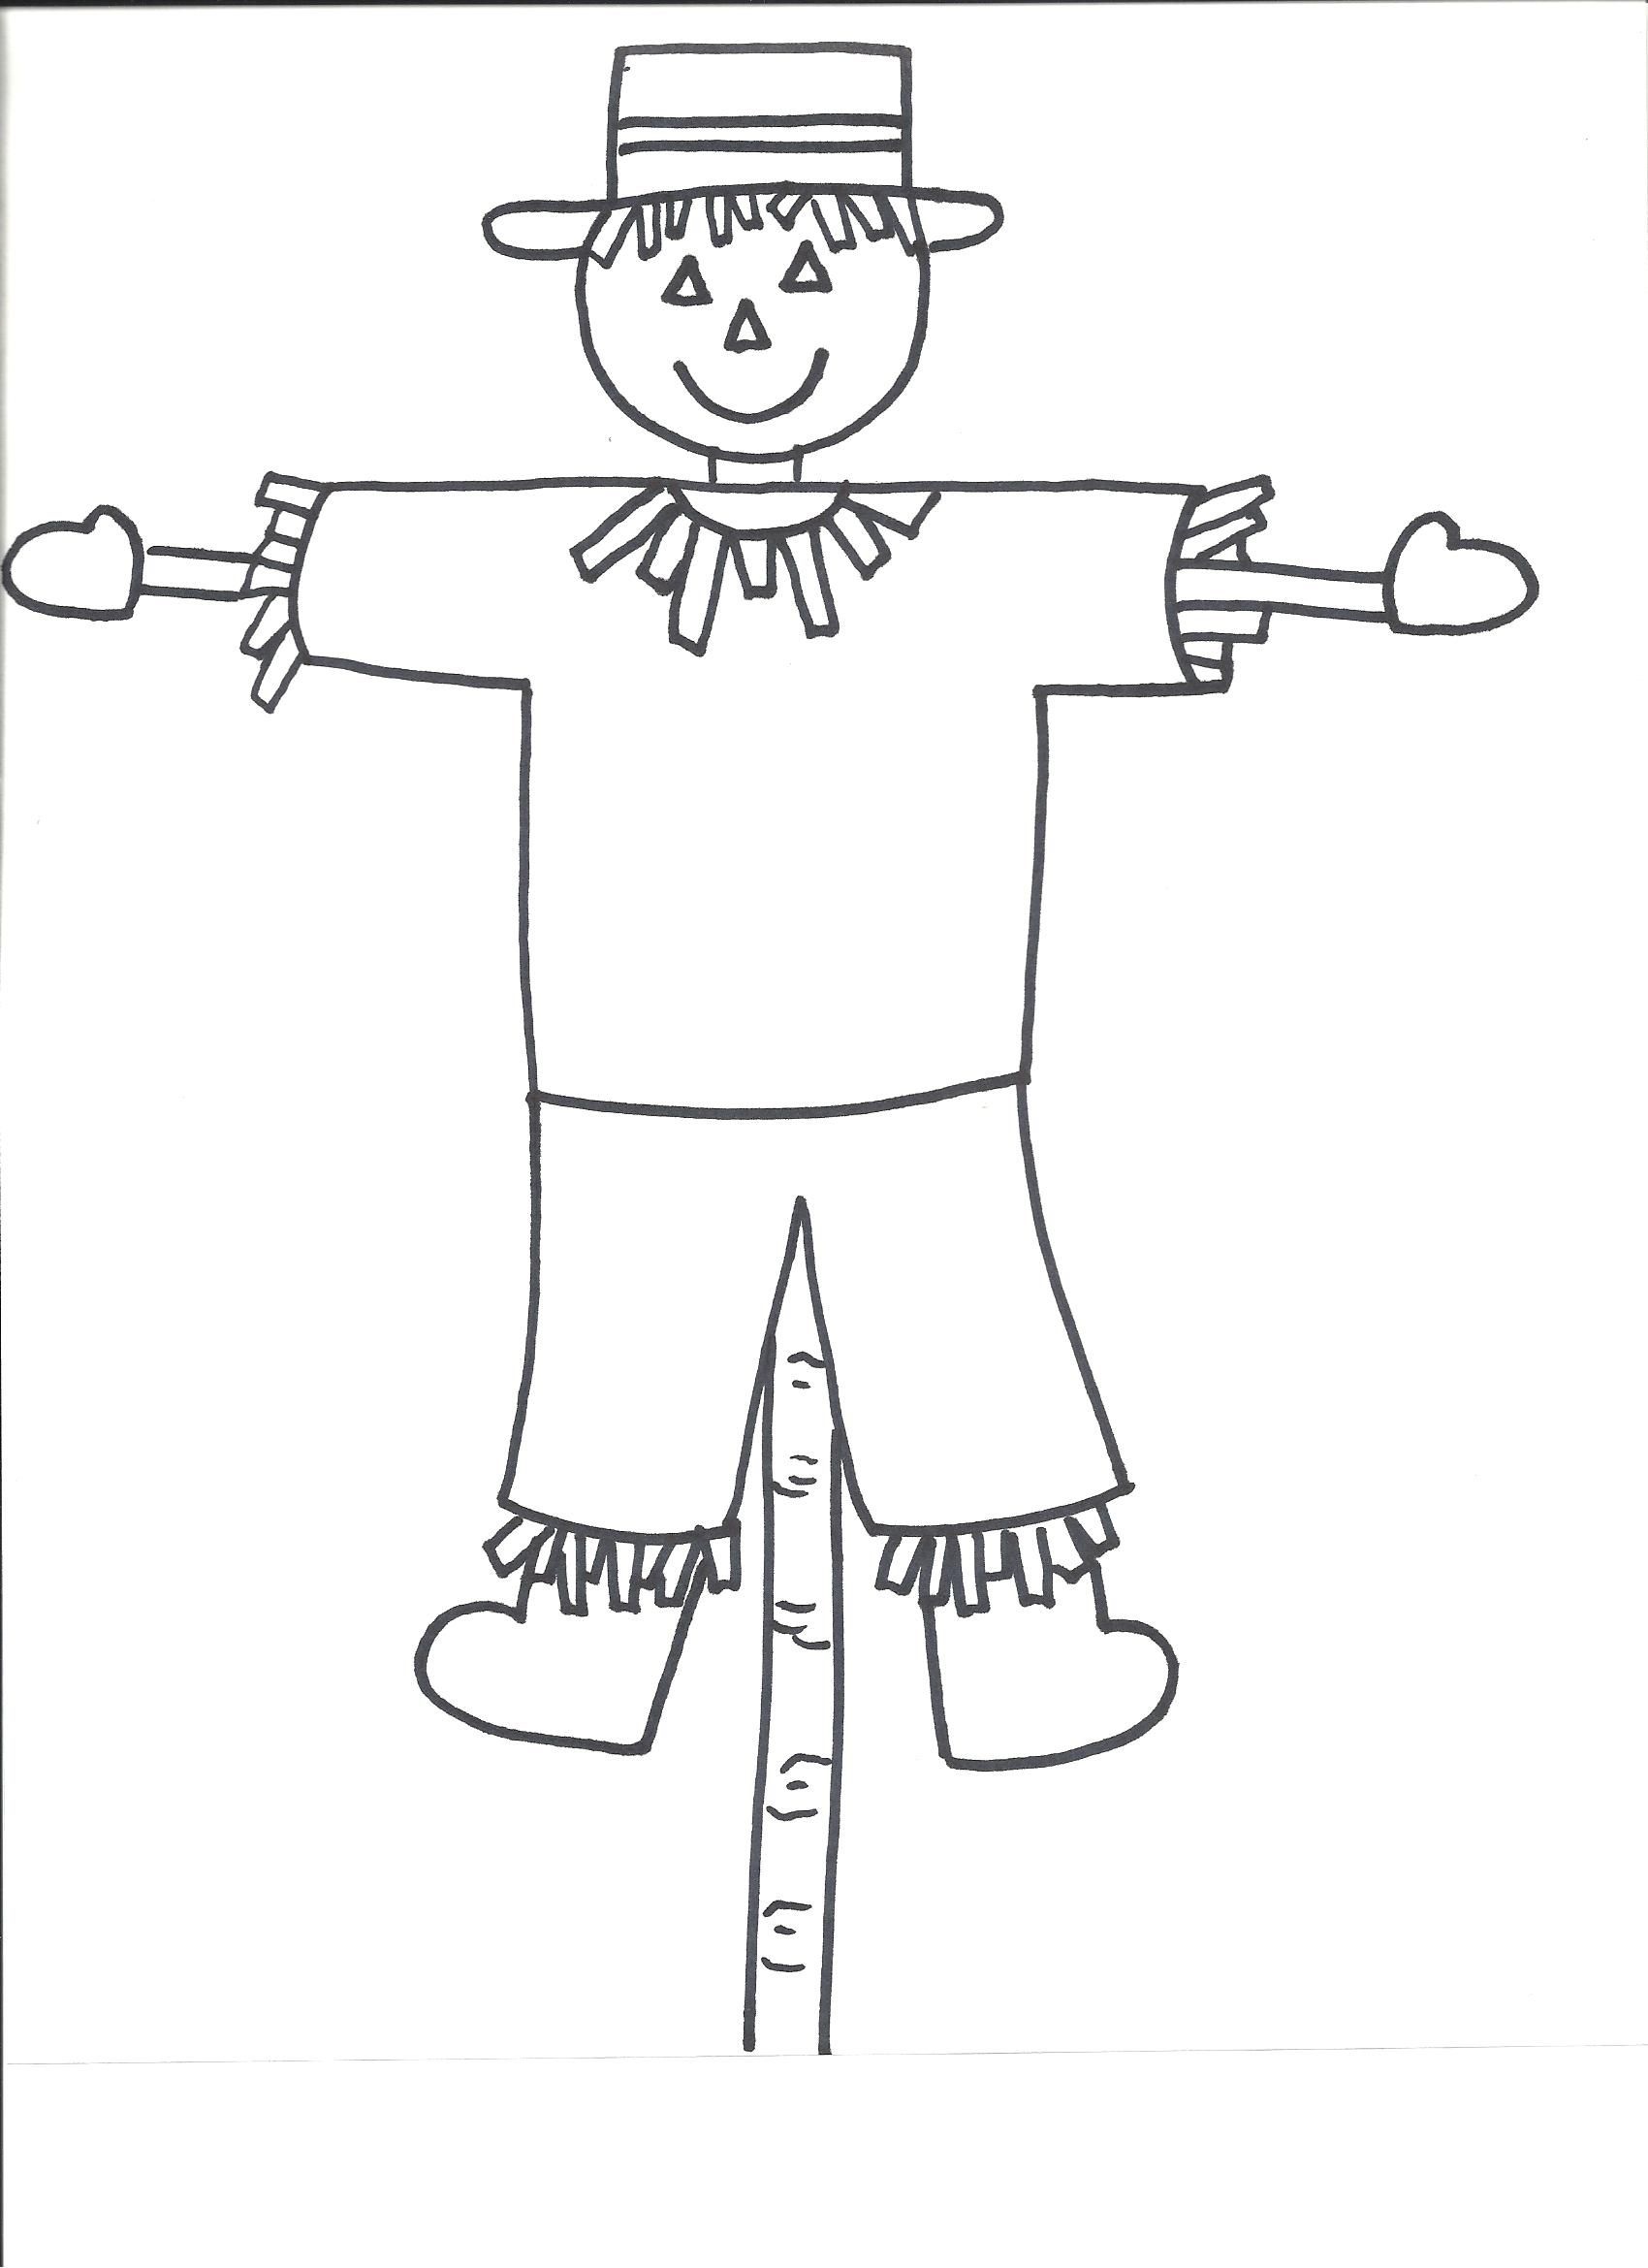 Scarecrow Template | Templates - Crafts For Preschool Kids | Art - Free Scarecrow Template Printable